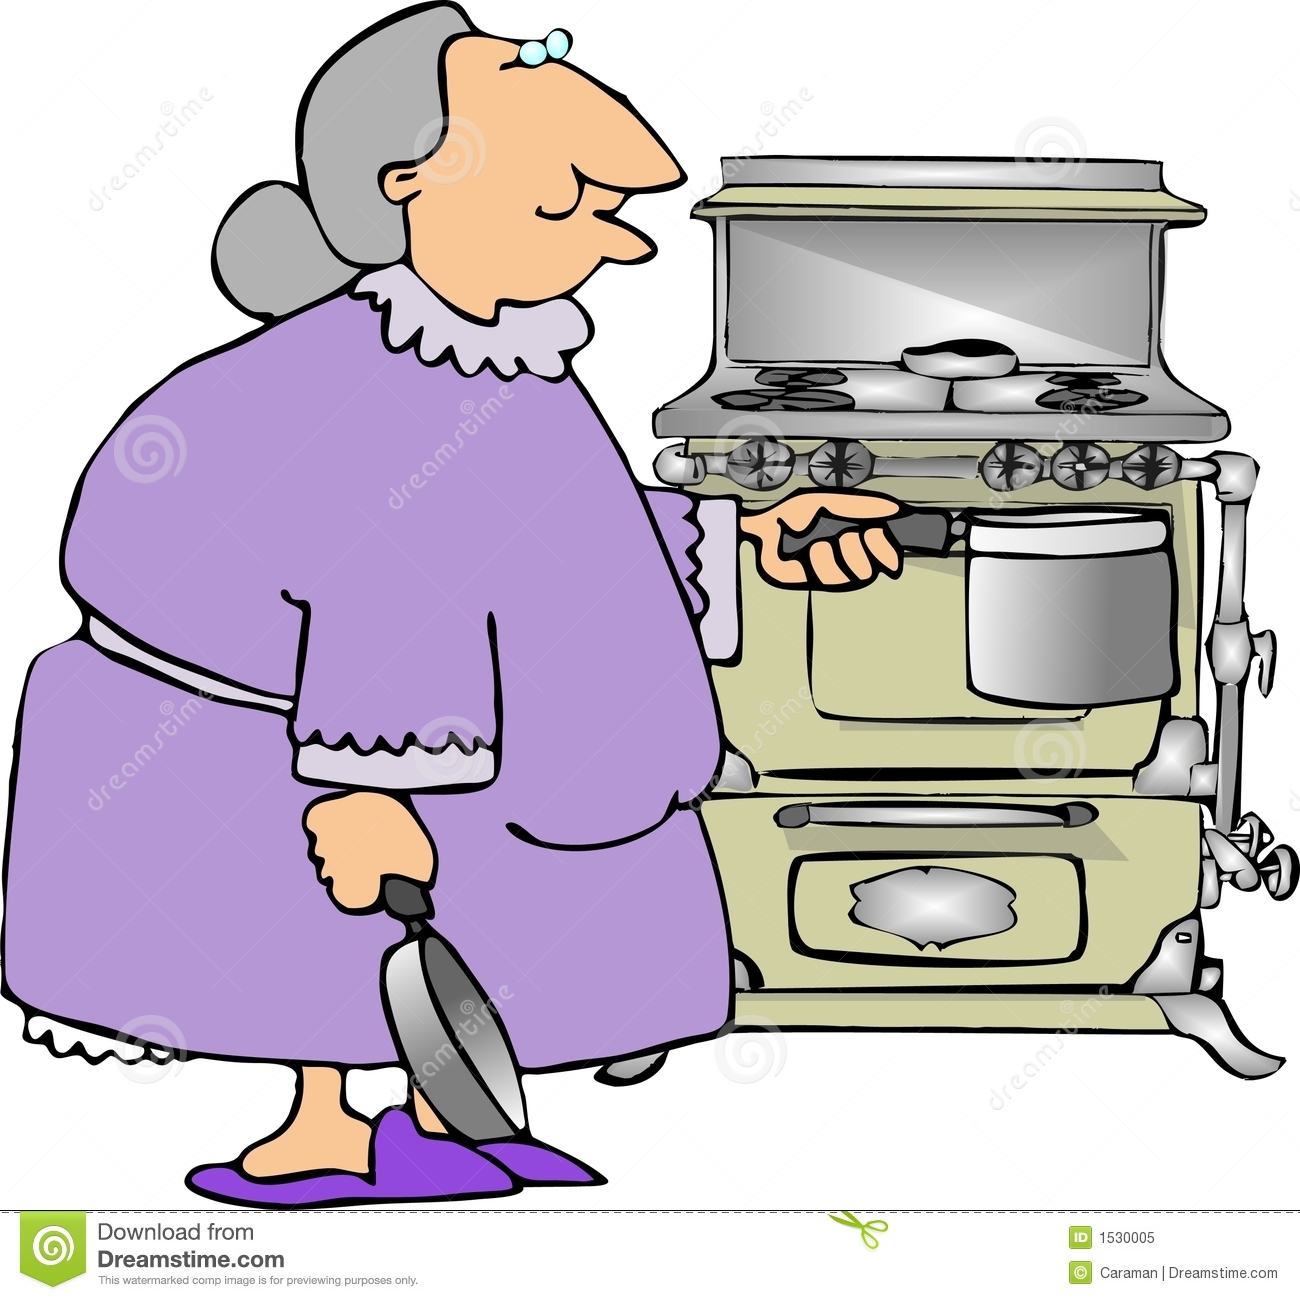 Cooking With Grandma Royalty Free Stock Photo   Image  1530005